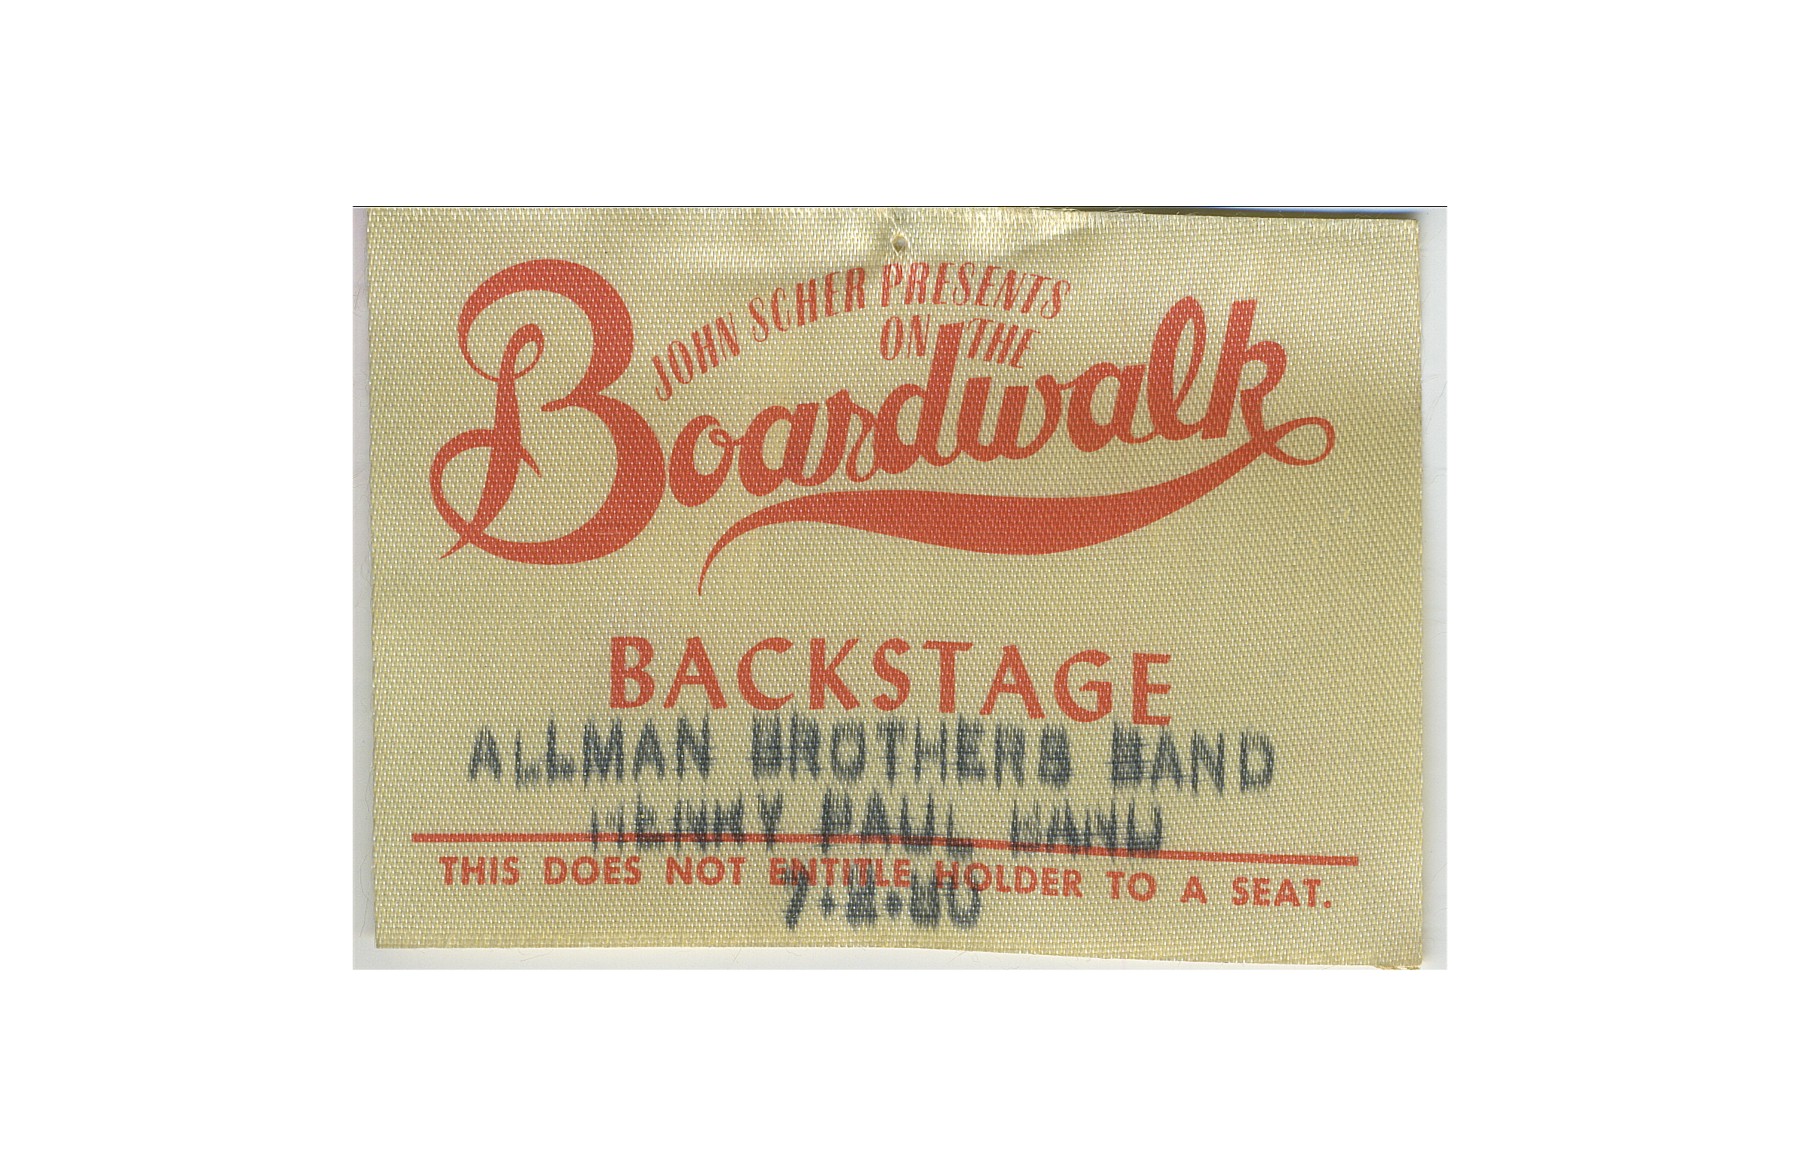 Backstage Pass to the Convention Hall show, Asbury Park. July 2nd, 1980.